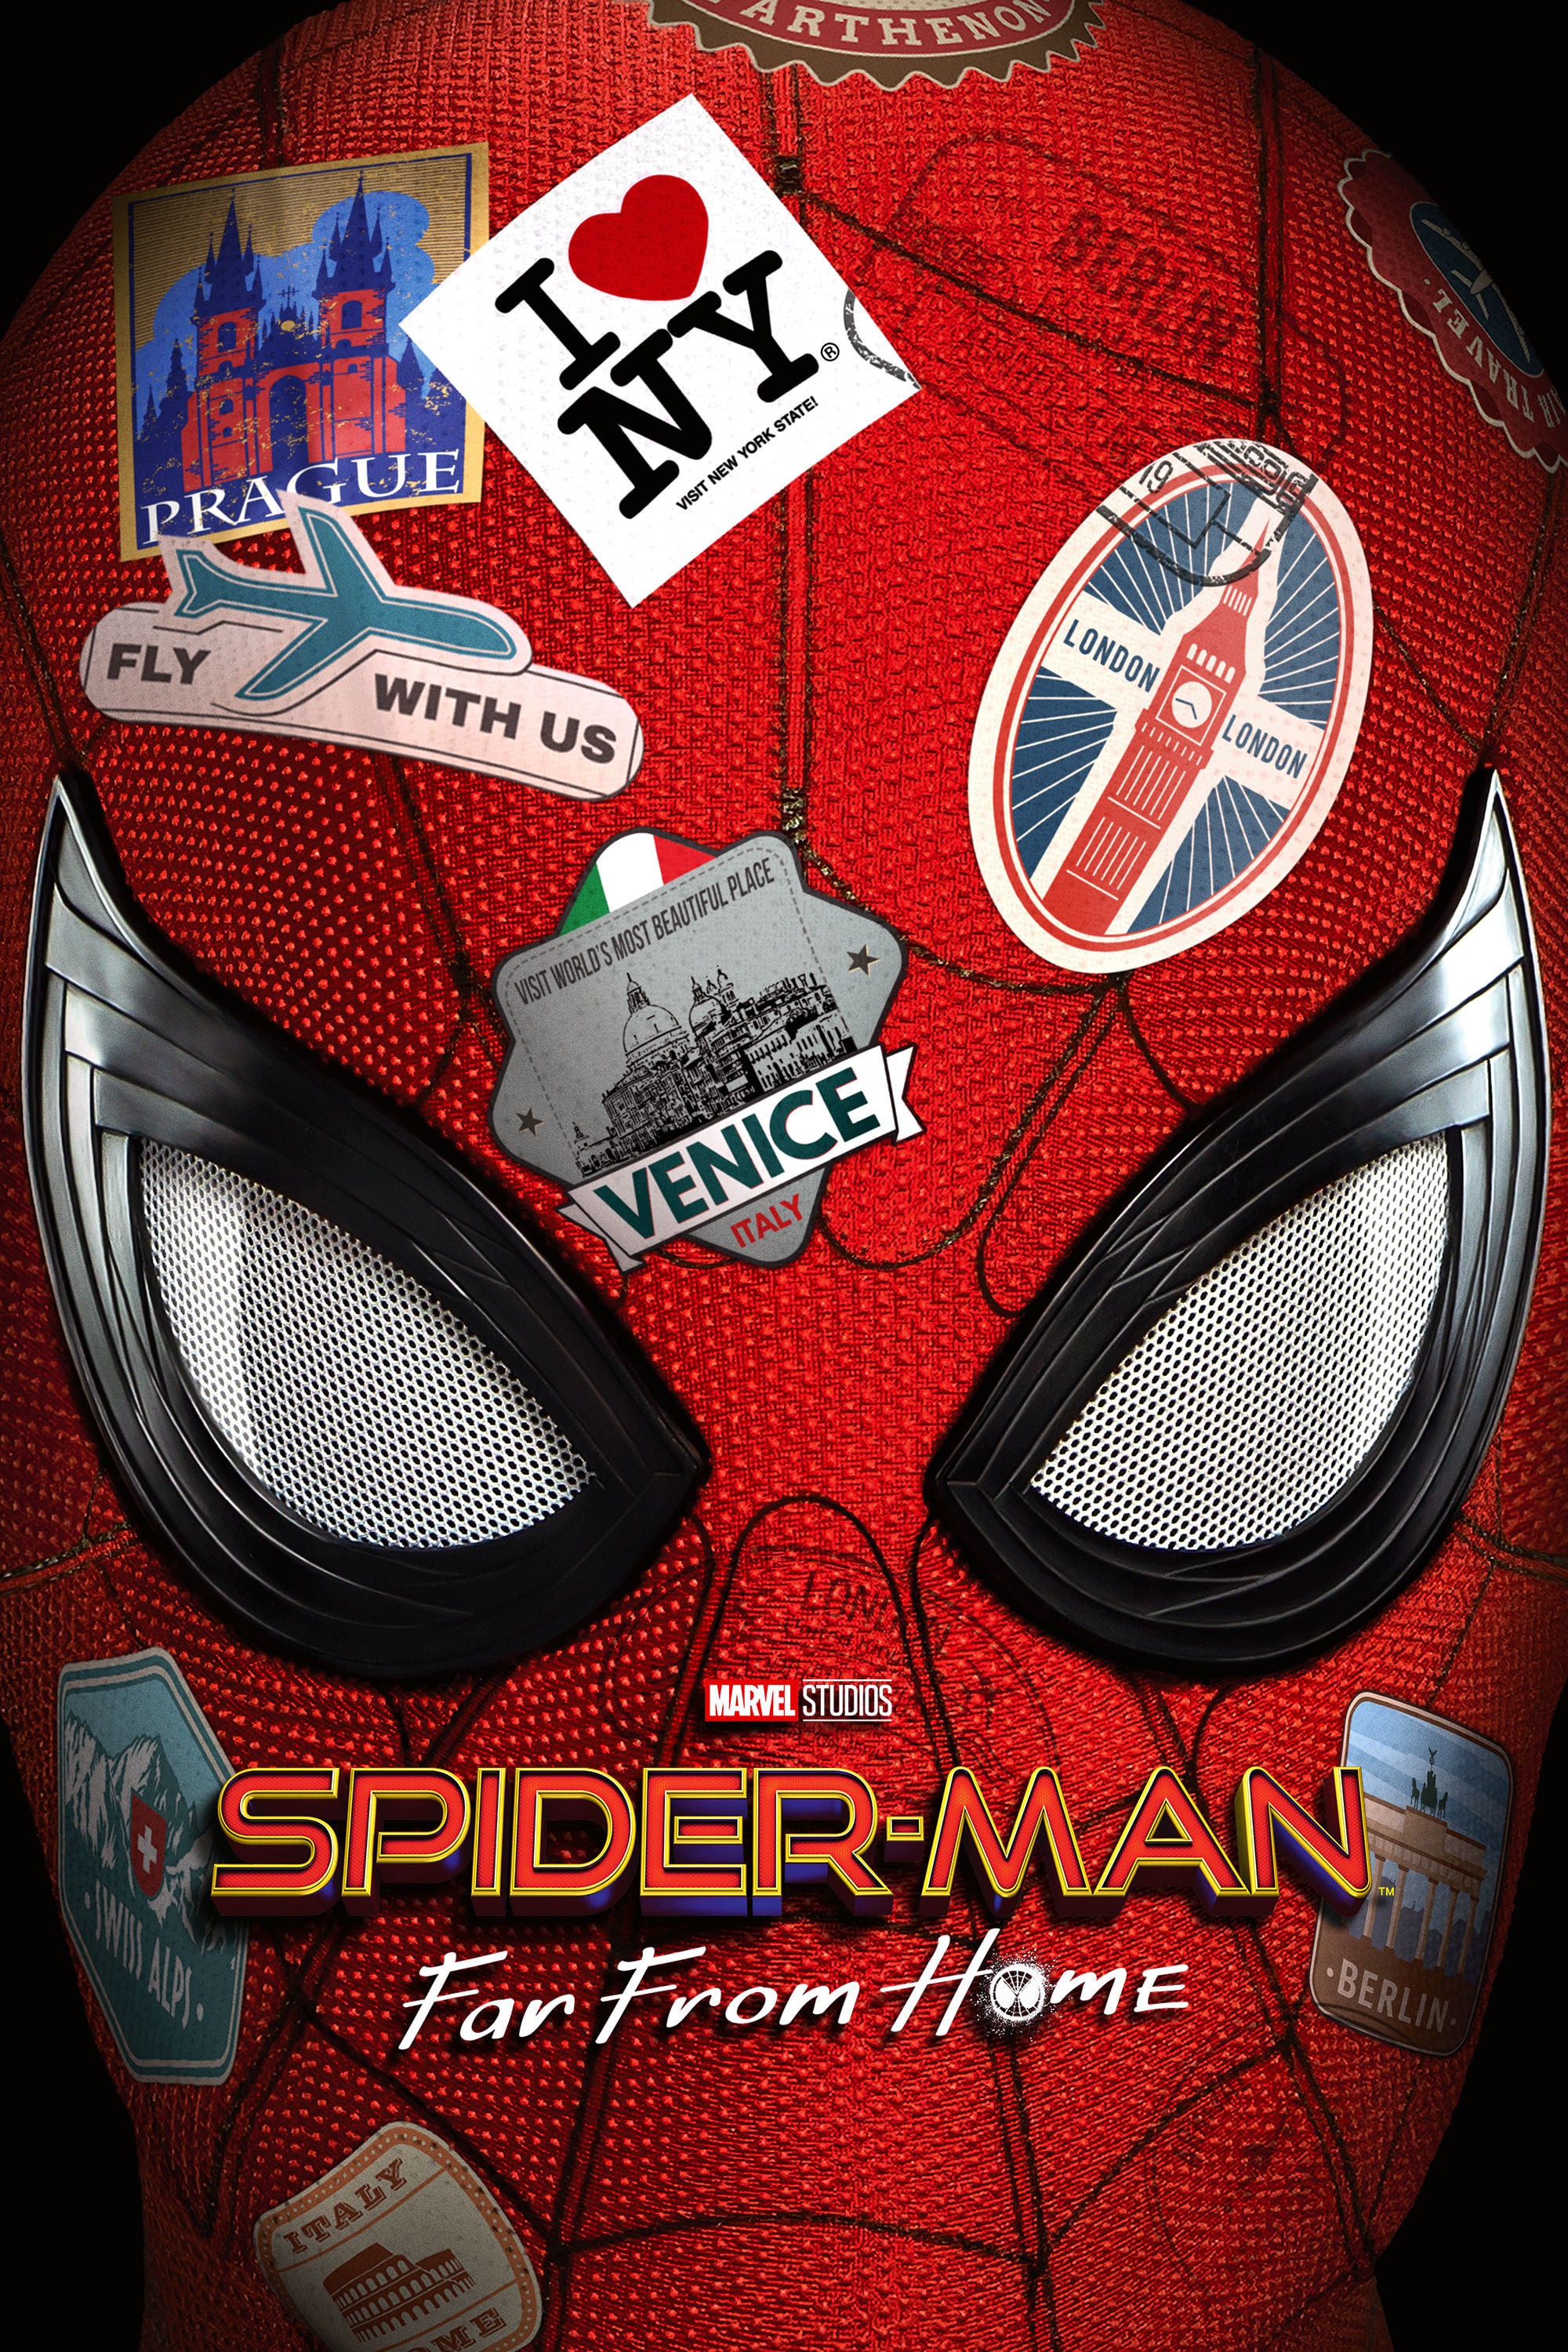 Spider-Man Far from Home